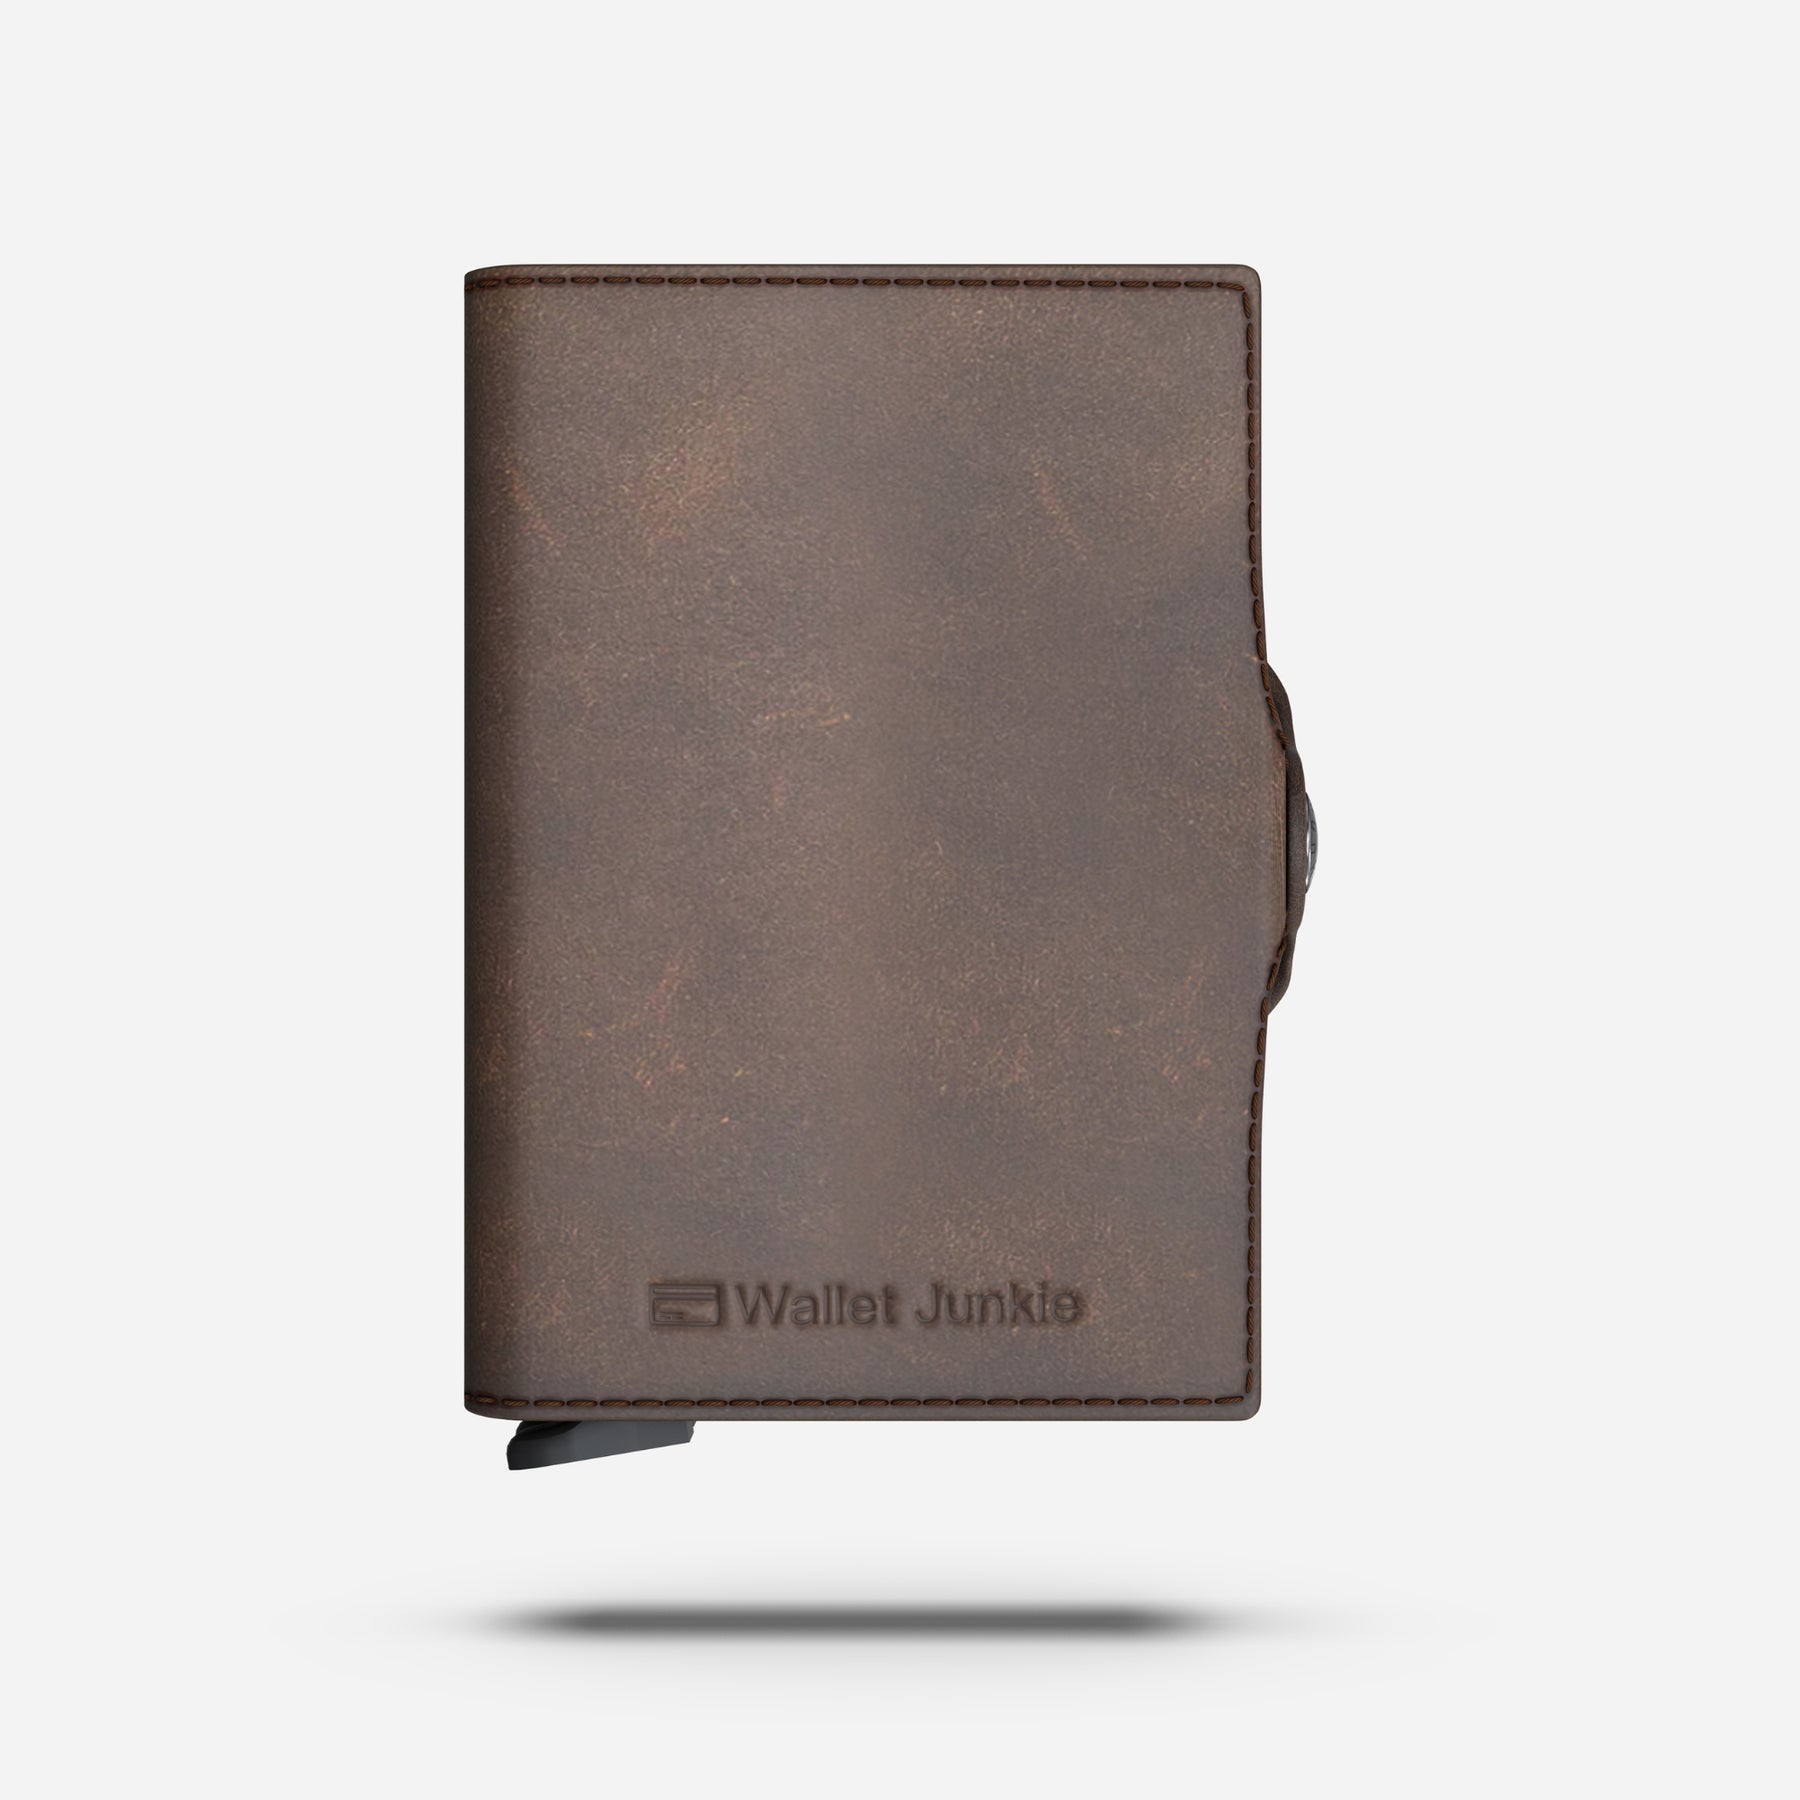 Double Pop Up Wallet Genuine Leather